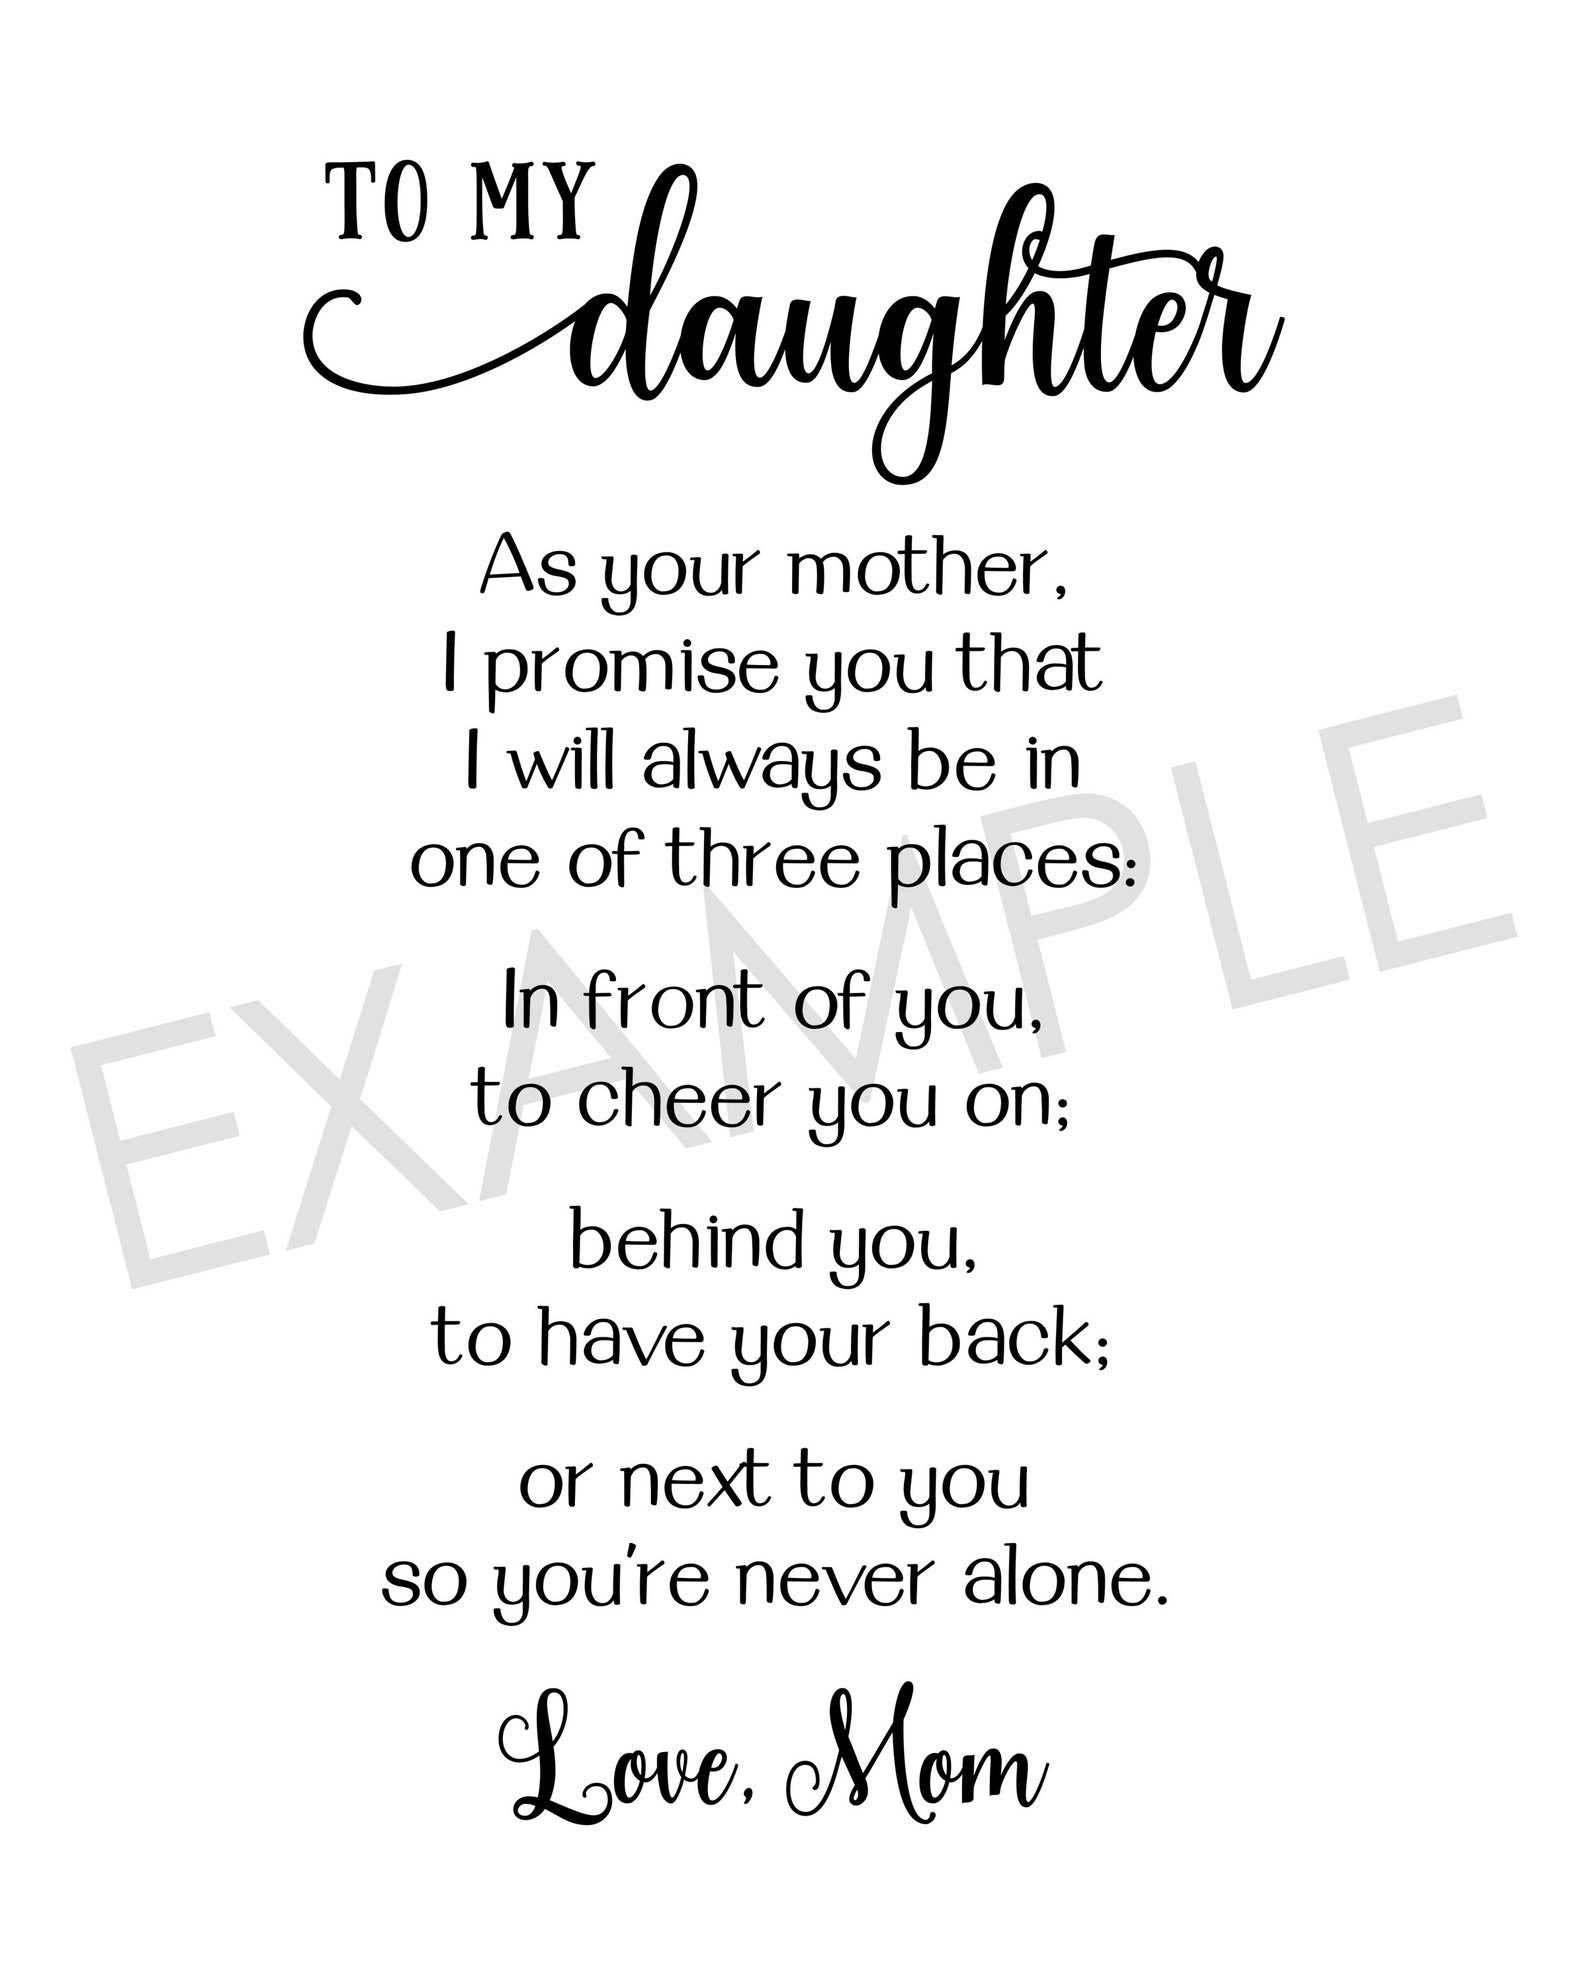 To My Daughter Printable Poem Greeting Card Wall Decor in - Etsy